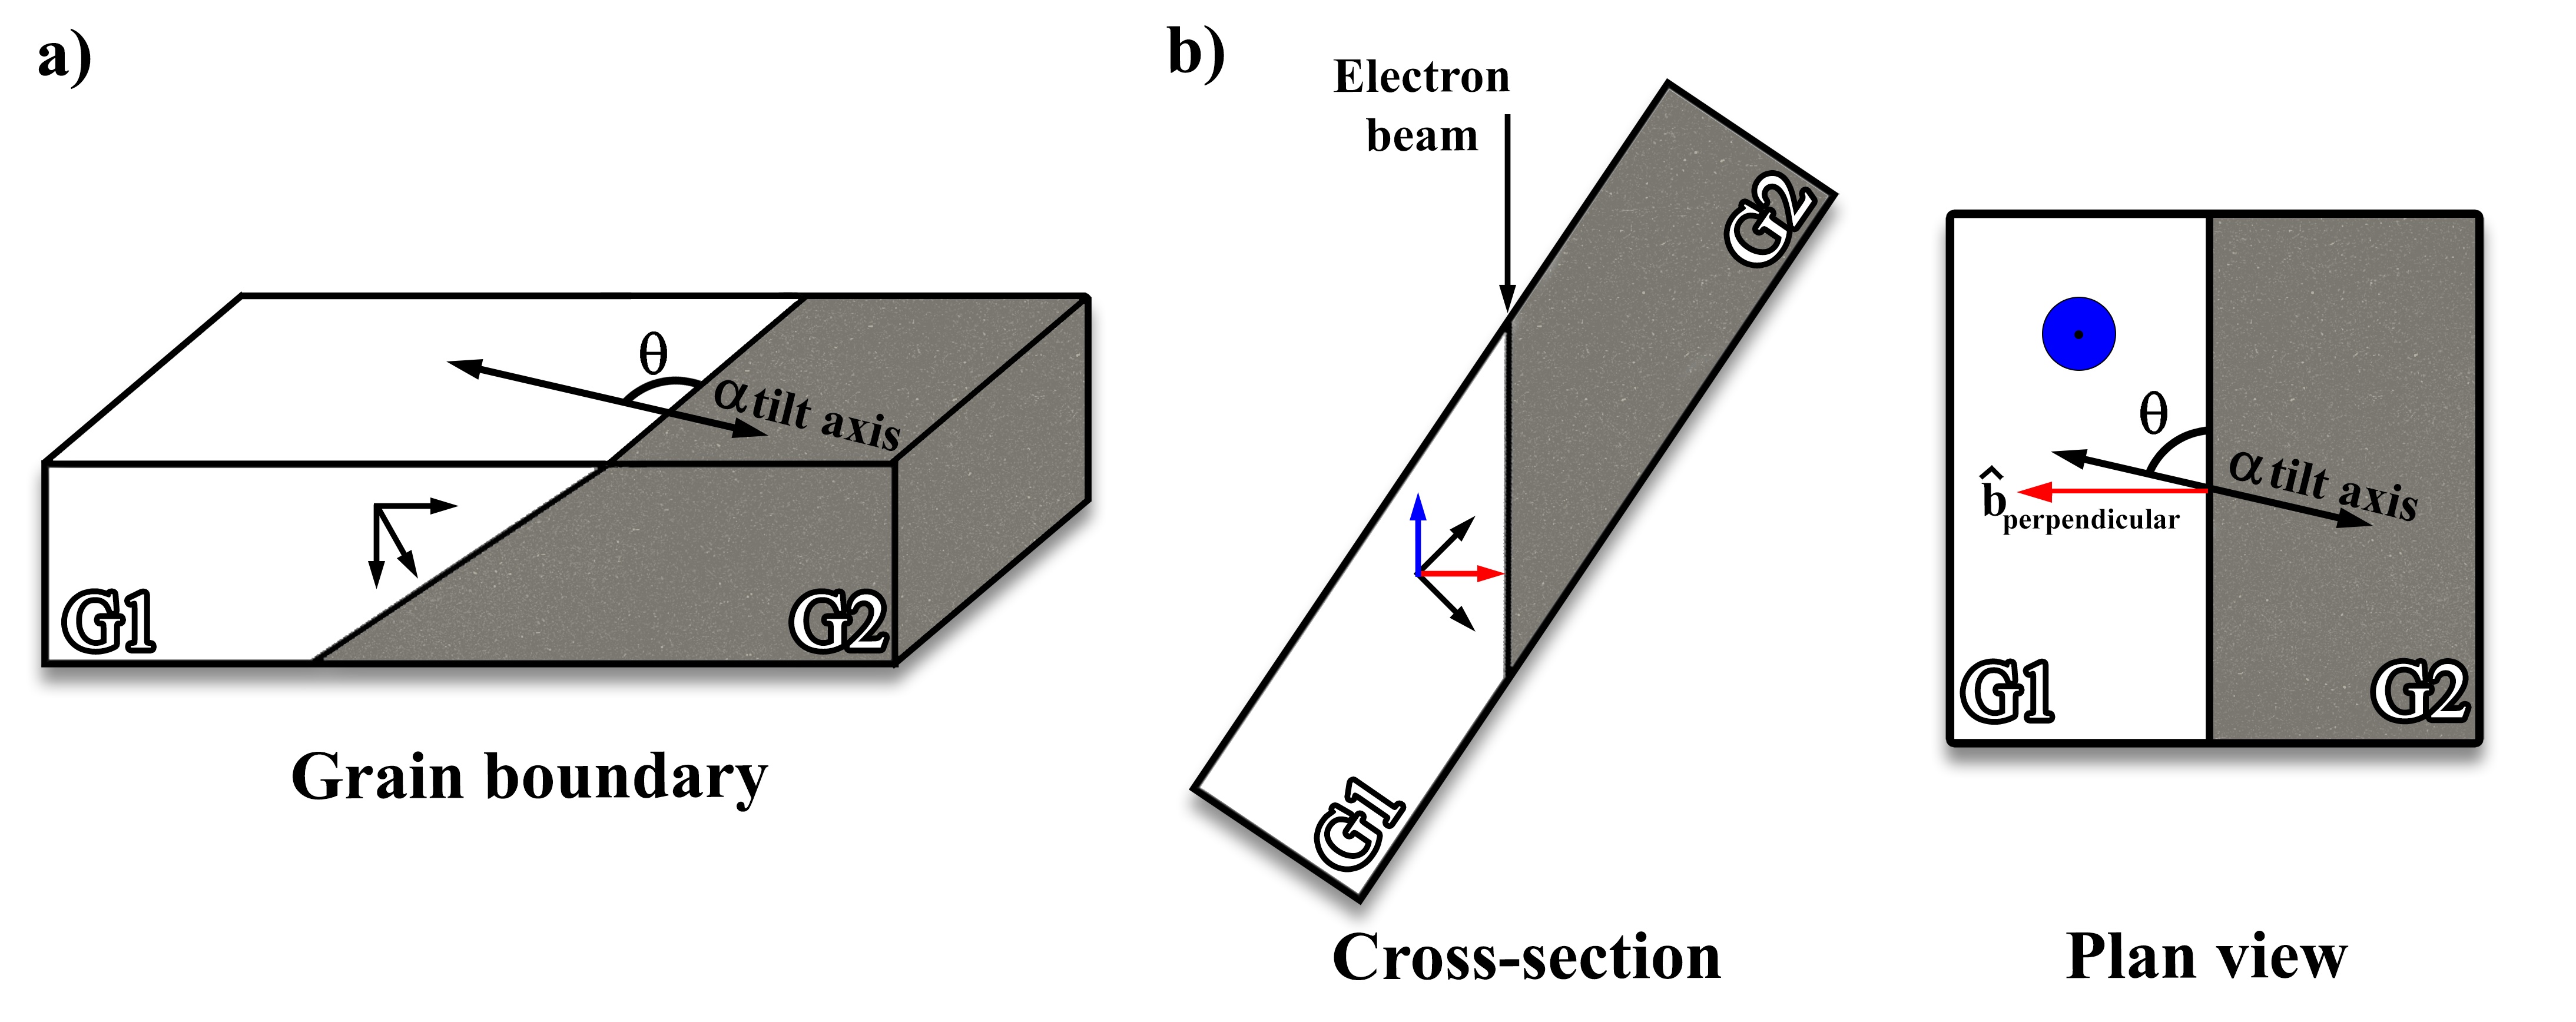 Schematic illustrating a grain boundary between two
grains (G1 and G2) in a standard orientation (a) and with the boundary
oriented edge on to the electron beam (b) shown in both cross-section
and plan views.